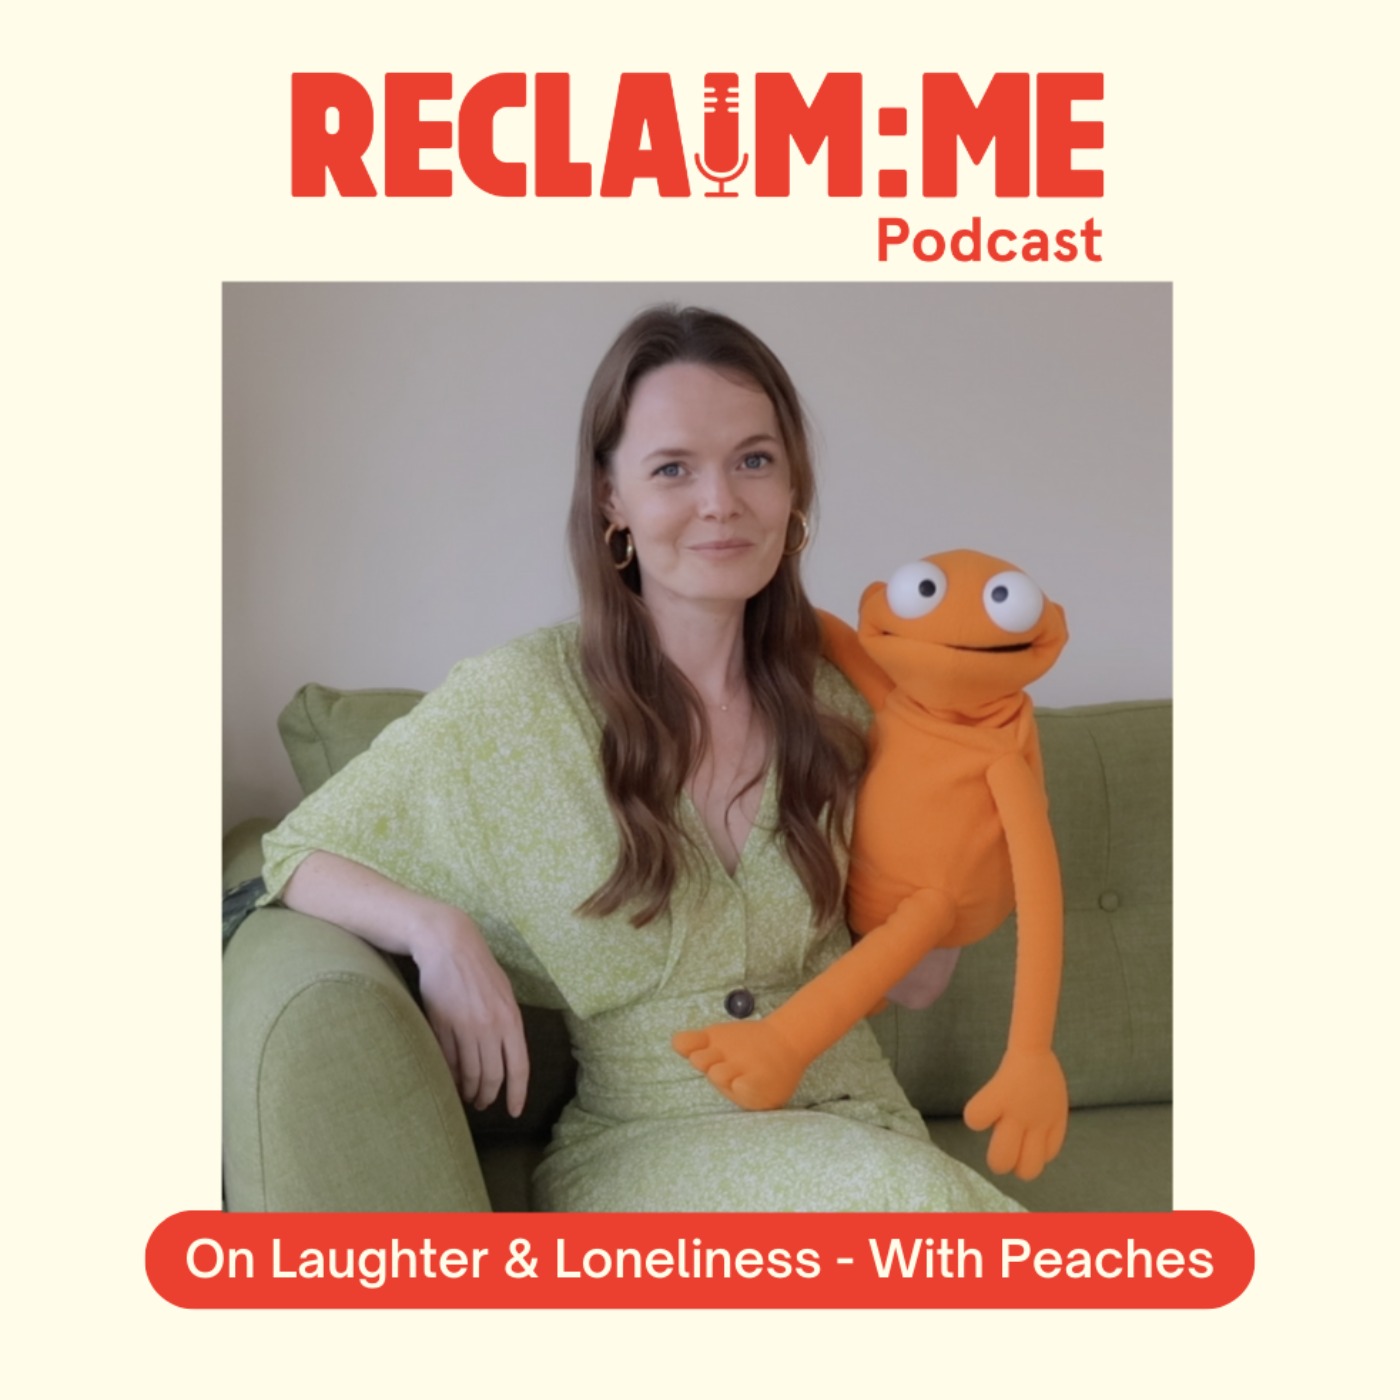 Episode 97 - On Laughter & Loneliness - With Peaches